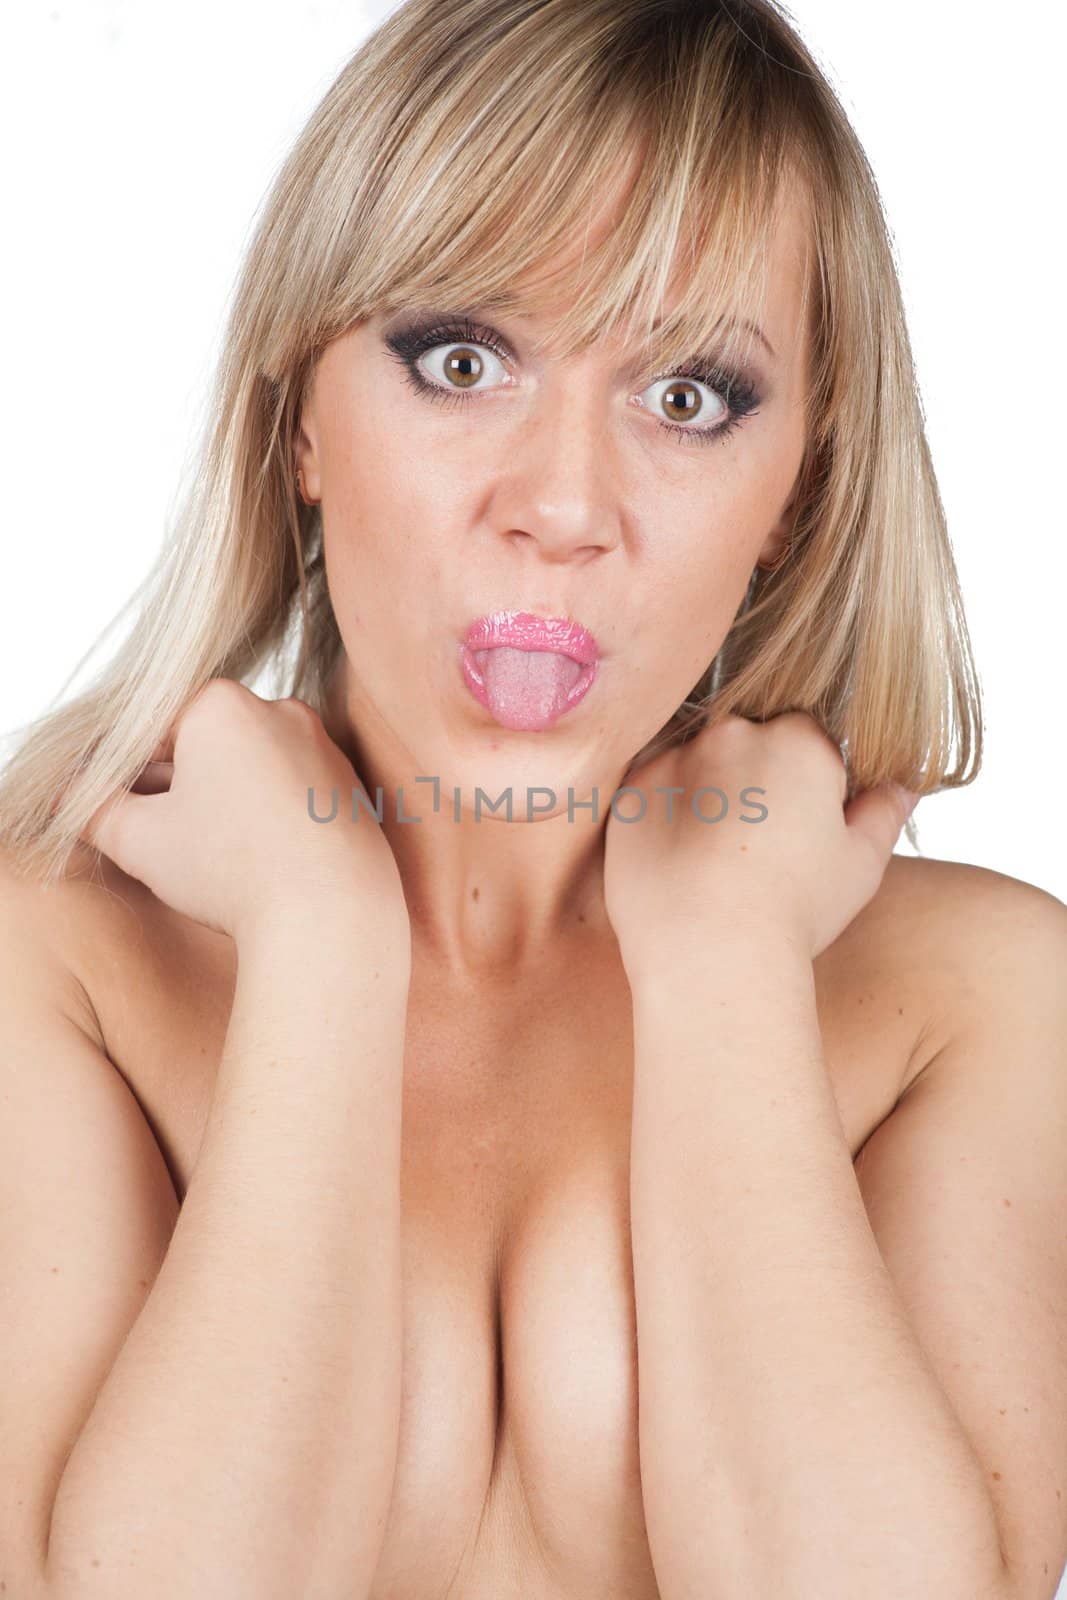 woman making a funny face by mettus